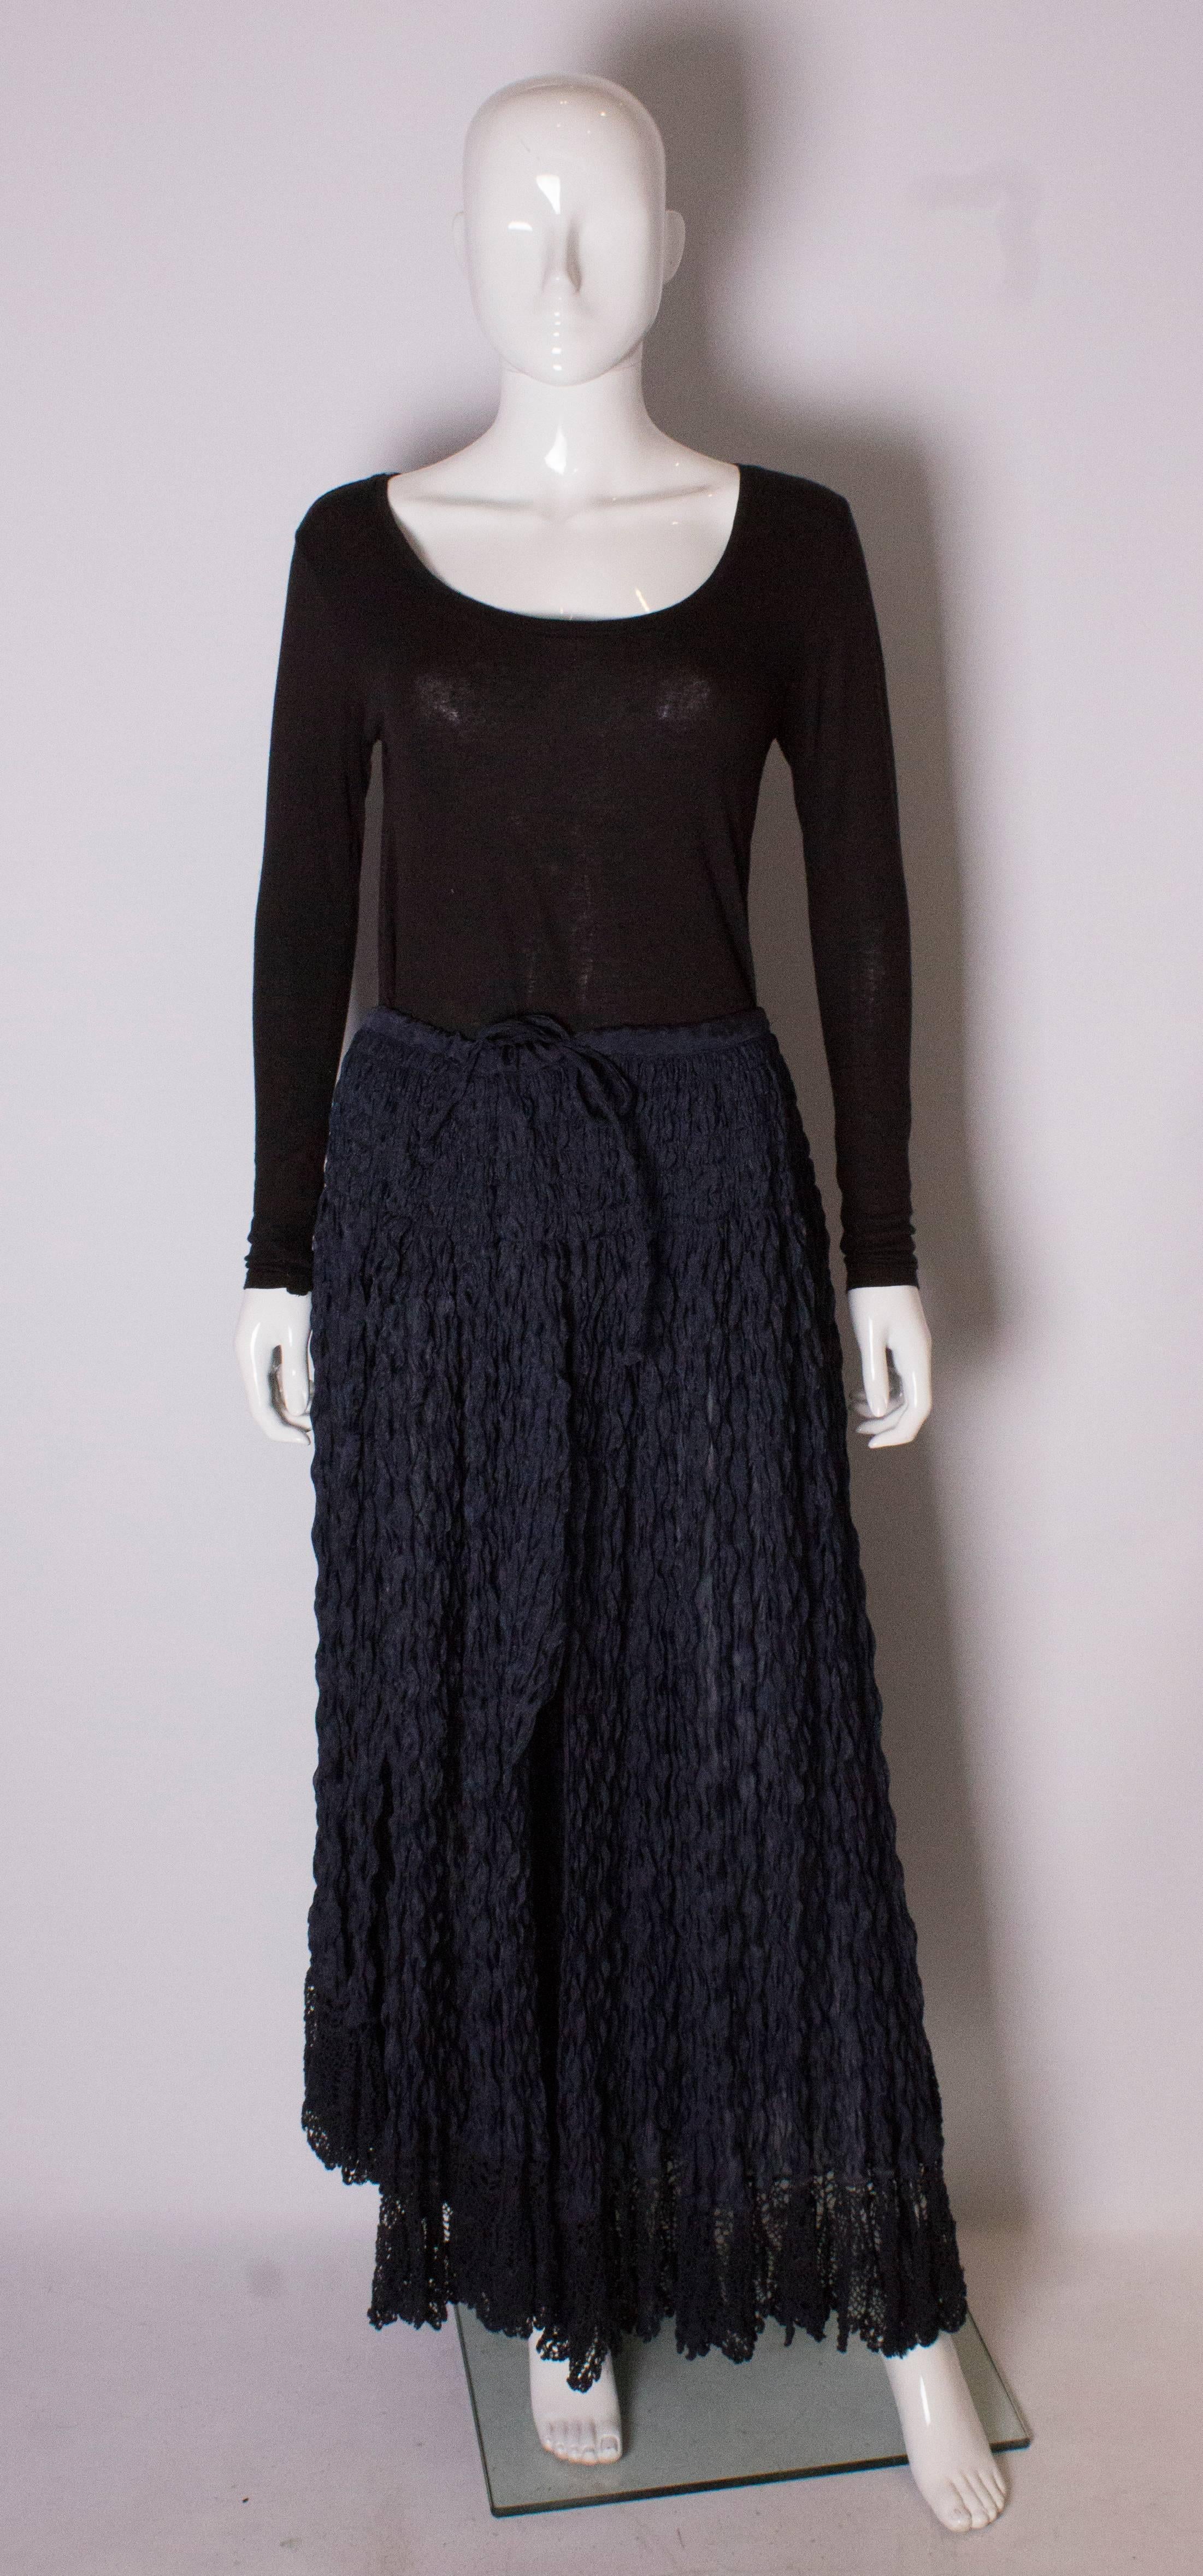 A lovely vintage blue skirt by Romeo Gigli. The skirt has  drawstring waist, and is made of a textured fabric with a lace trim at the hem, and has several slits .